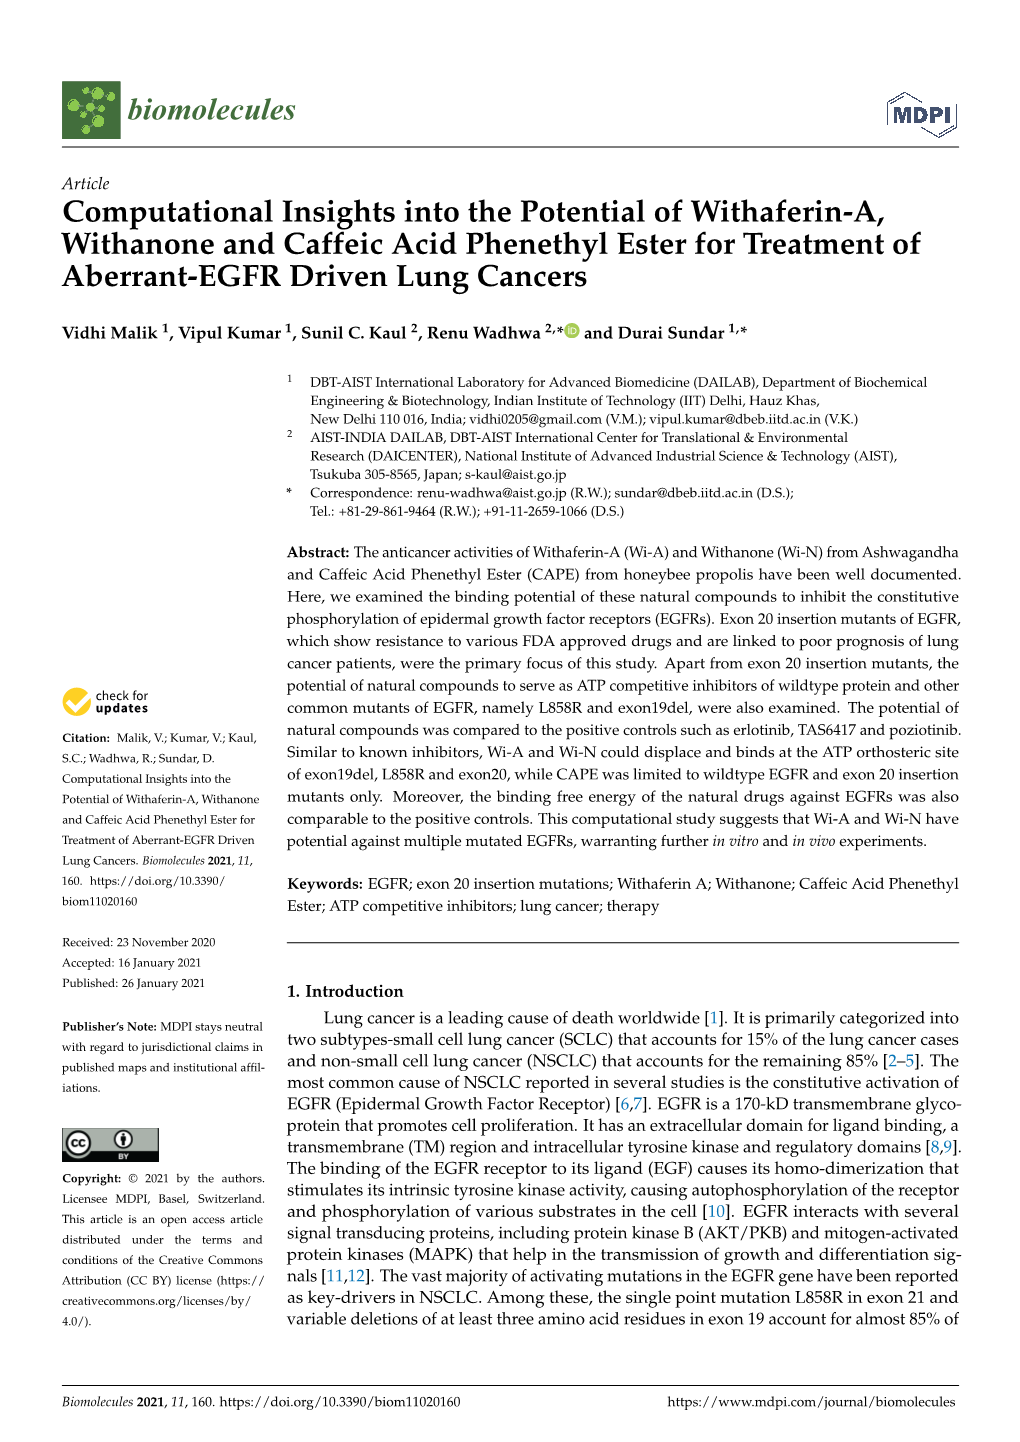 Computational Insights Into the Potential of Withaferin-A, Withanone and Caffeic Acid Phenethyl Ester for Treatment of Aberrant-EGFR Driven Lung Cancers